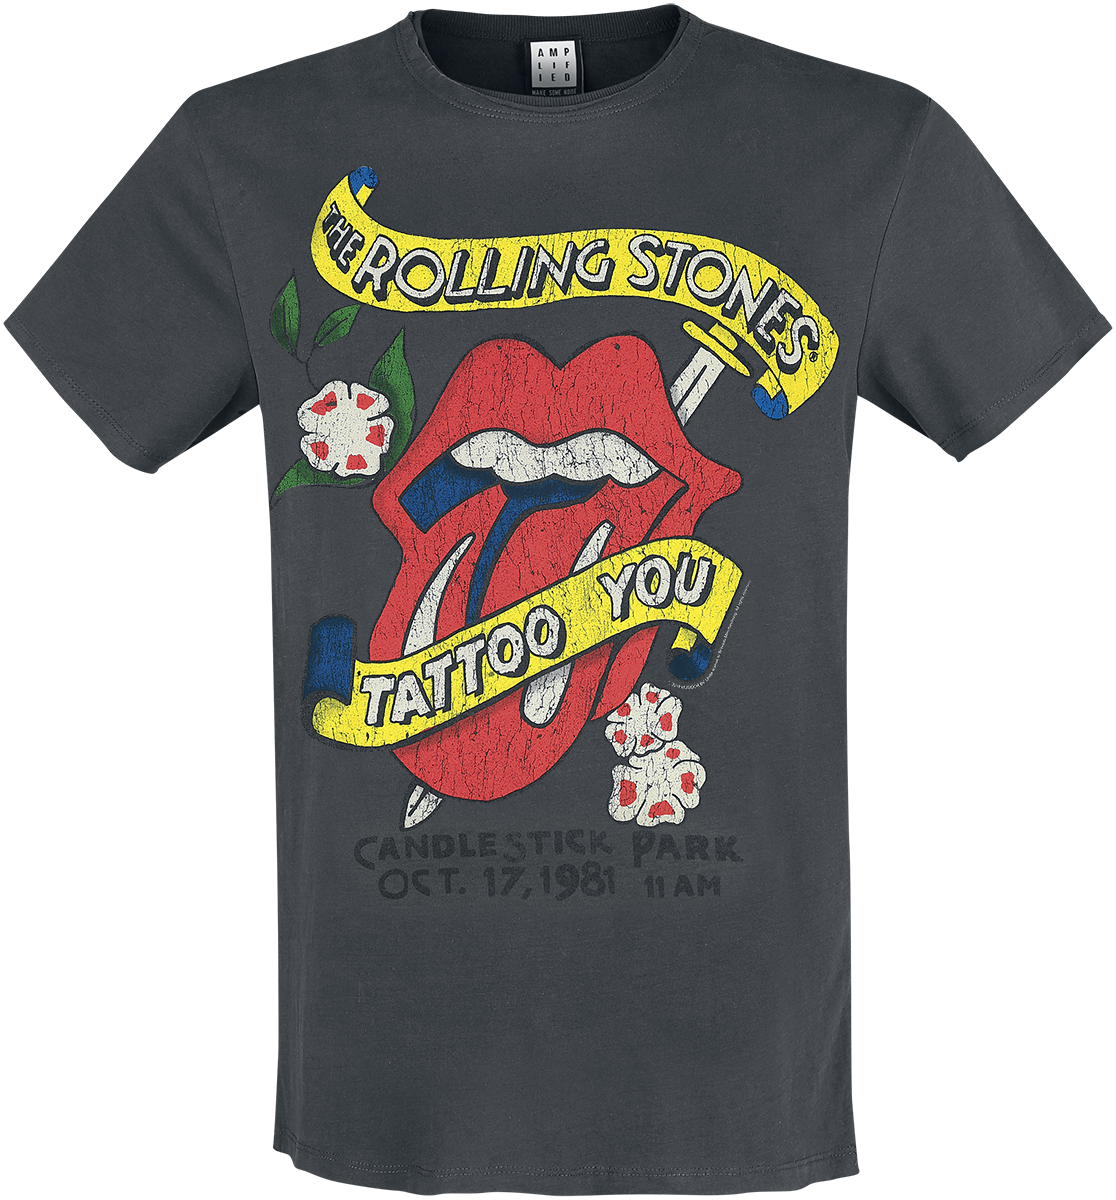 The Rolling Stones - Amplified Collection - Tattoo You - T-Shirt - charcoal image